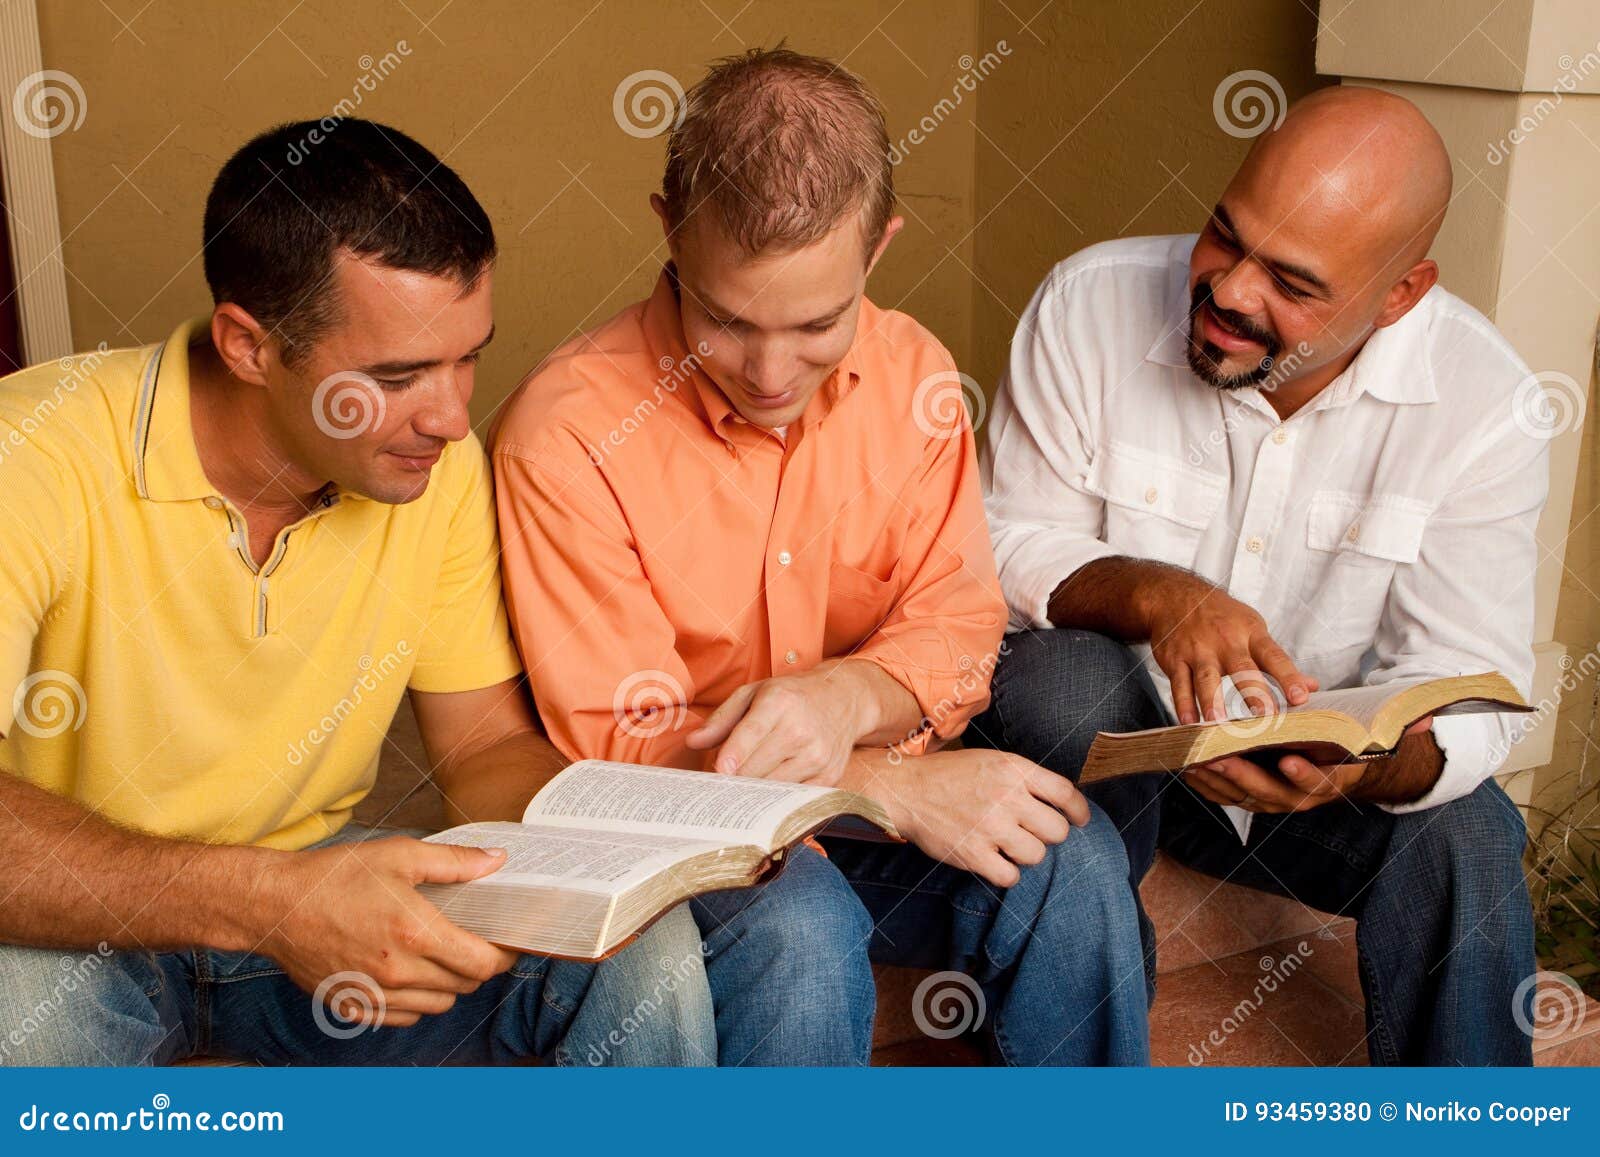 men`s group bible study. multicultural small group.